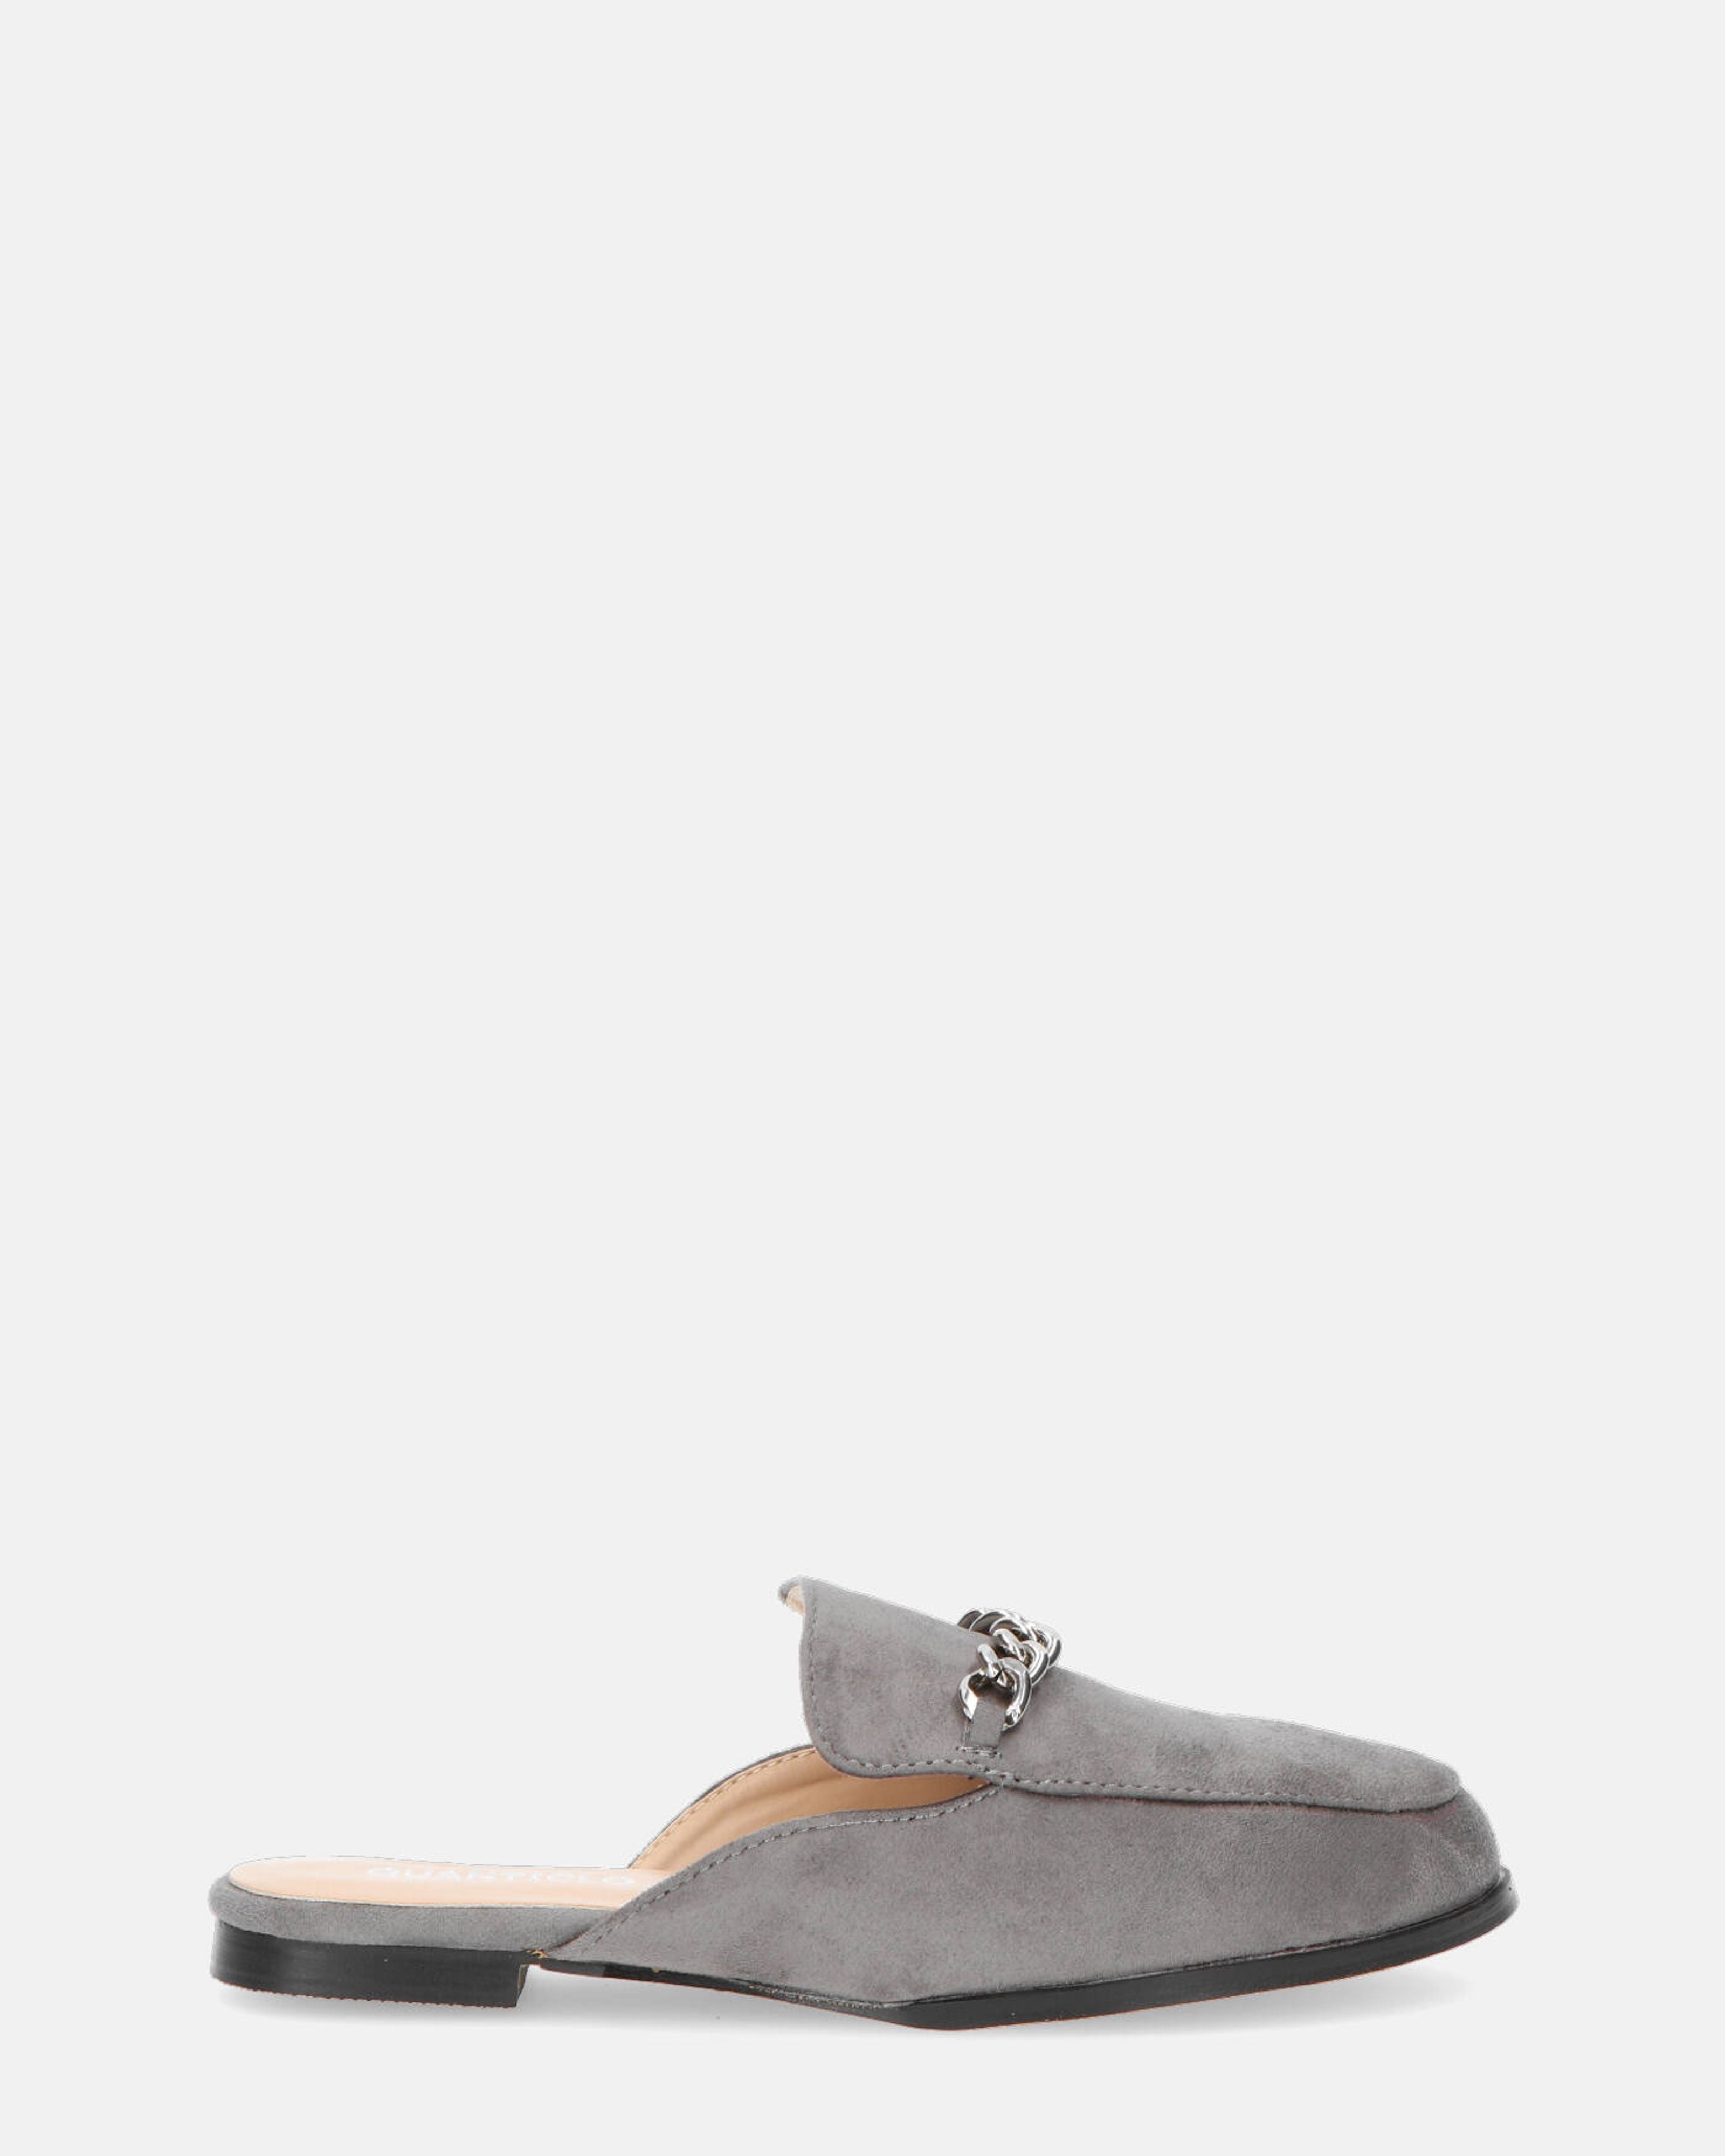 SHELLEY - grey moccasins with beige sole